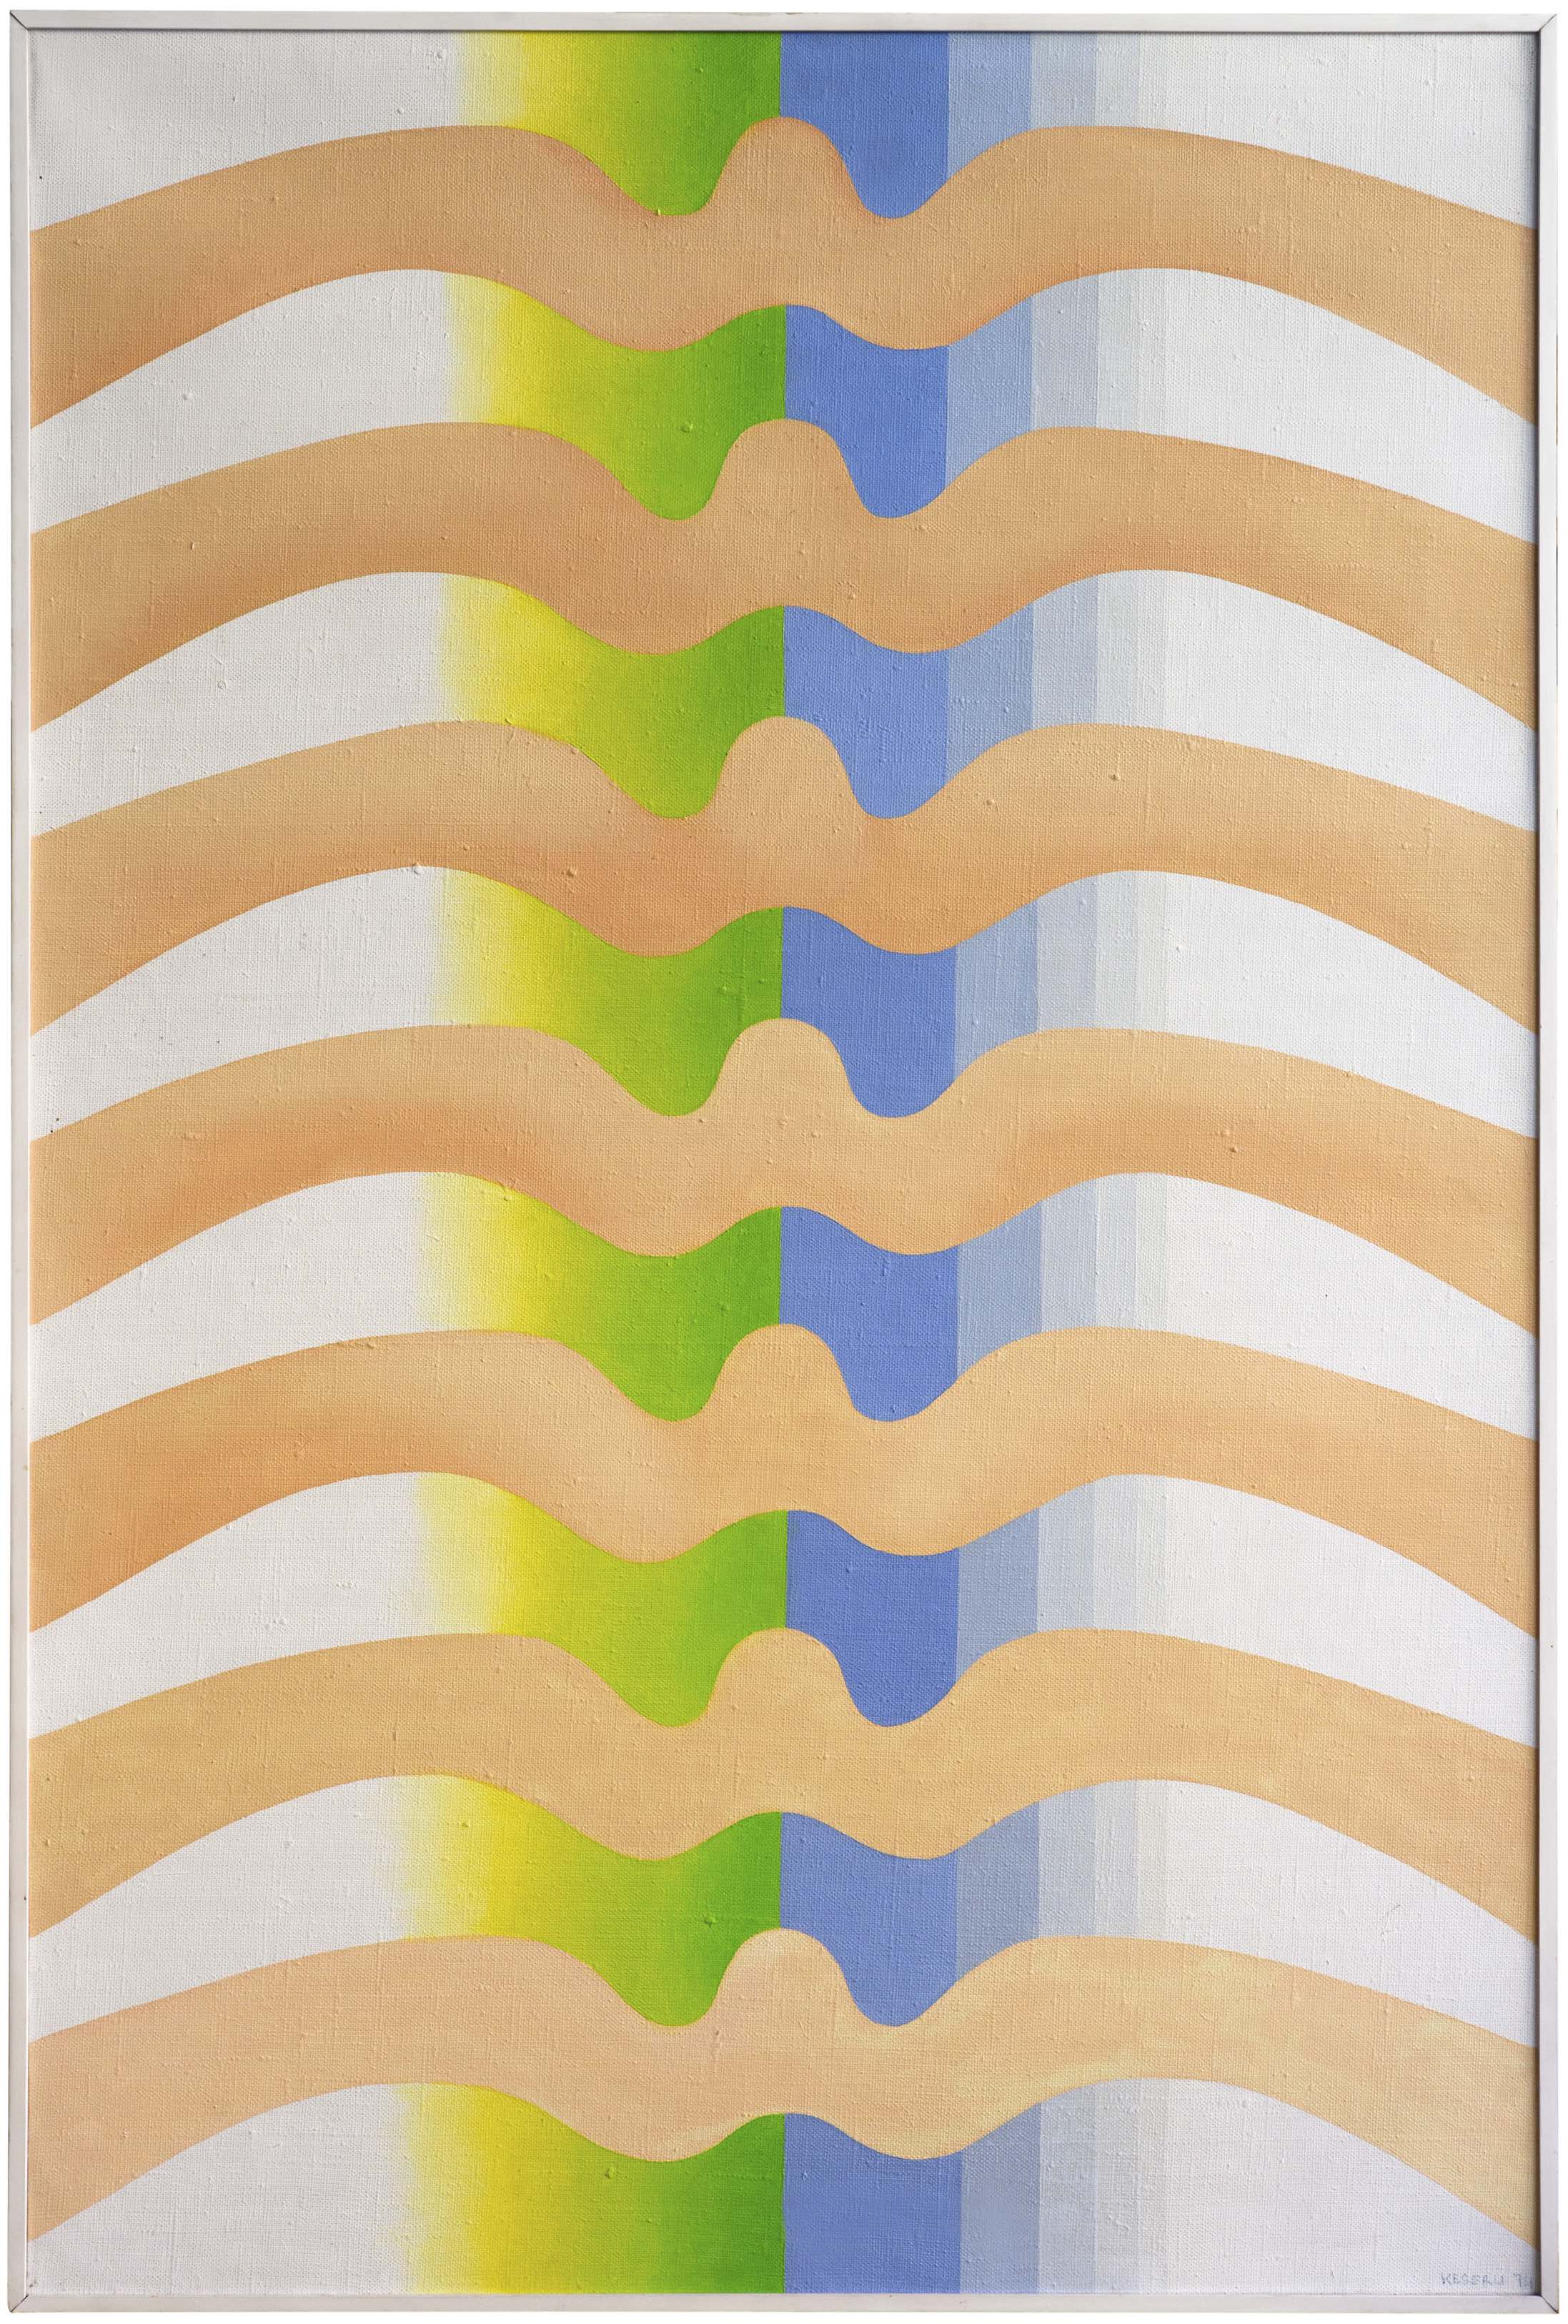 Ilona KeserÃ¼, Varying Space 1 (Blue and Green), 1974